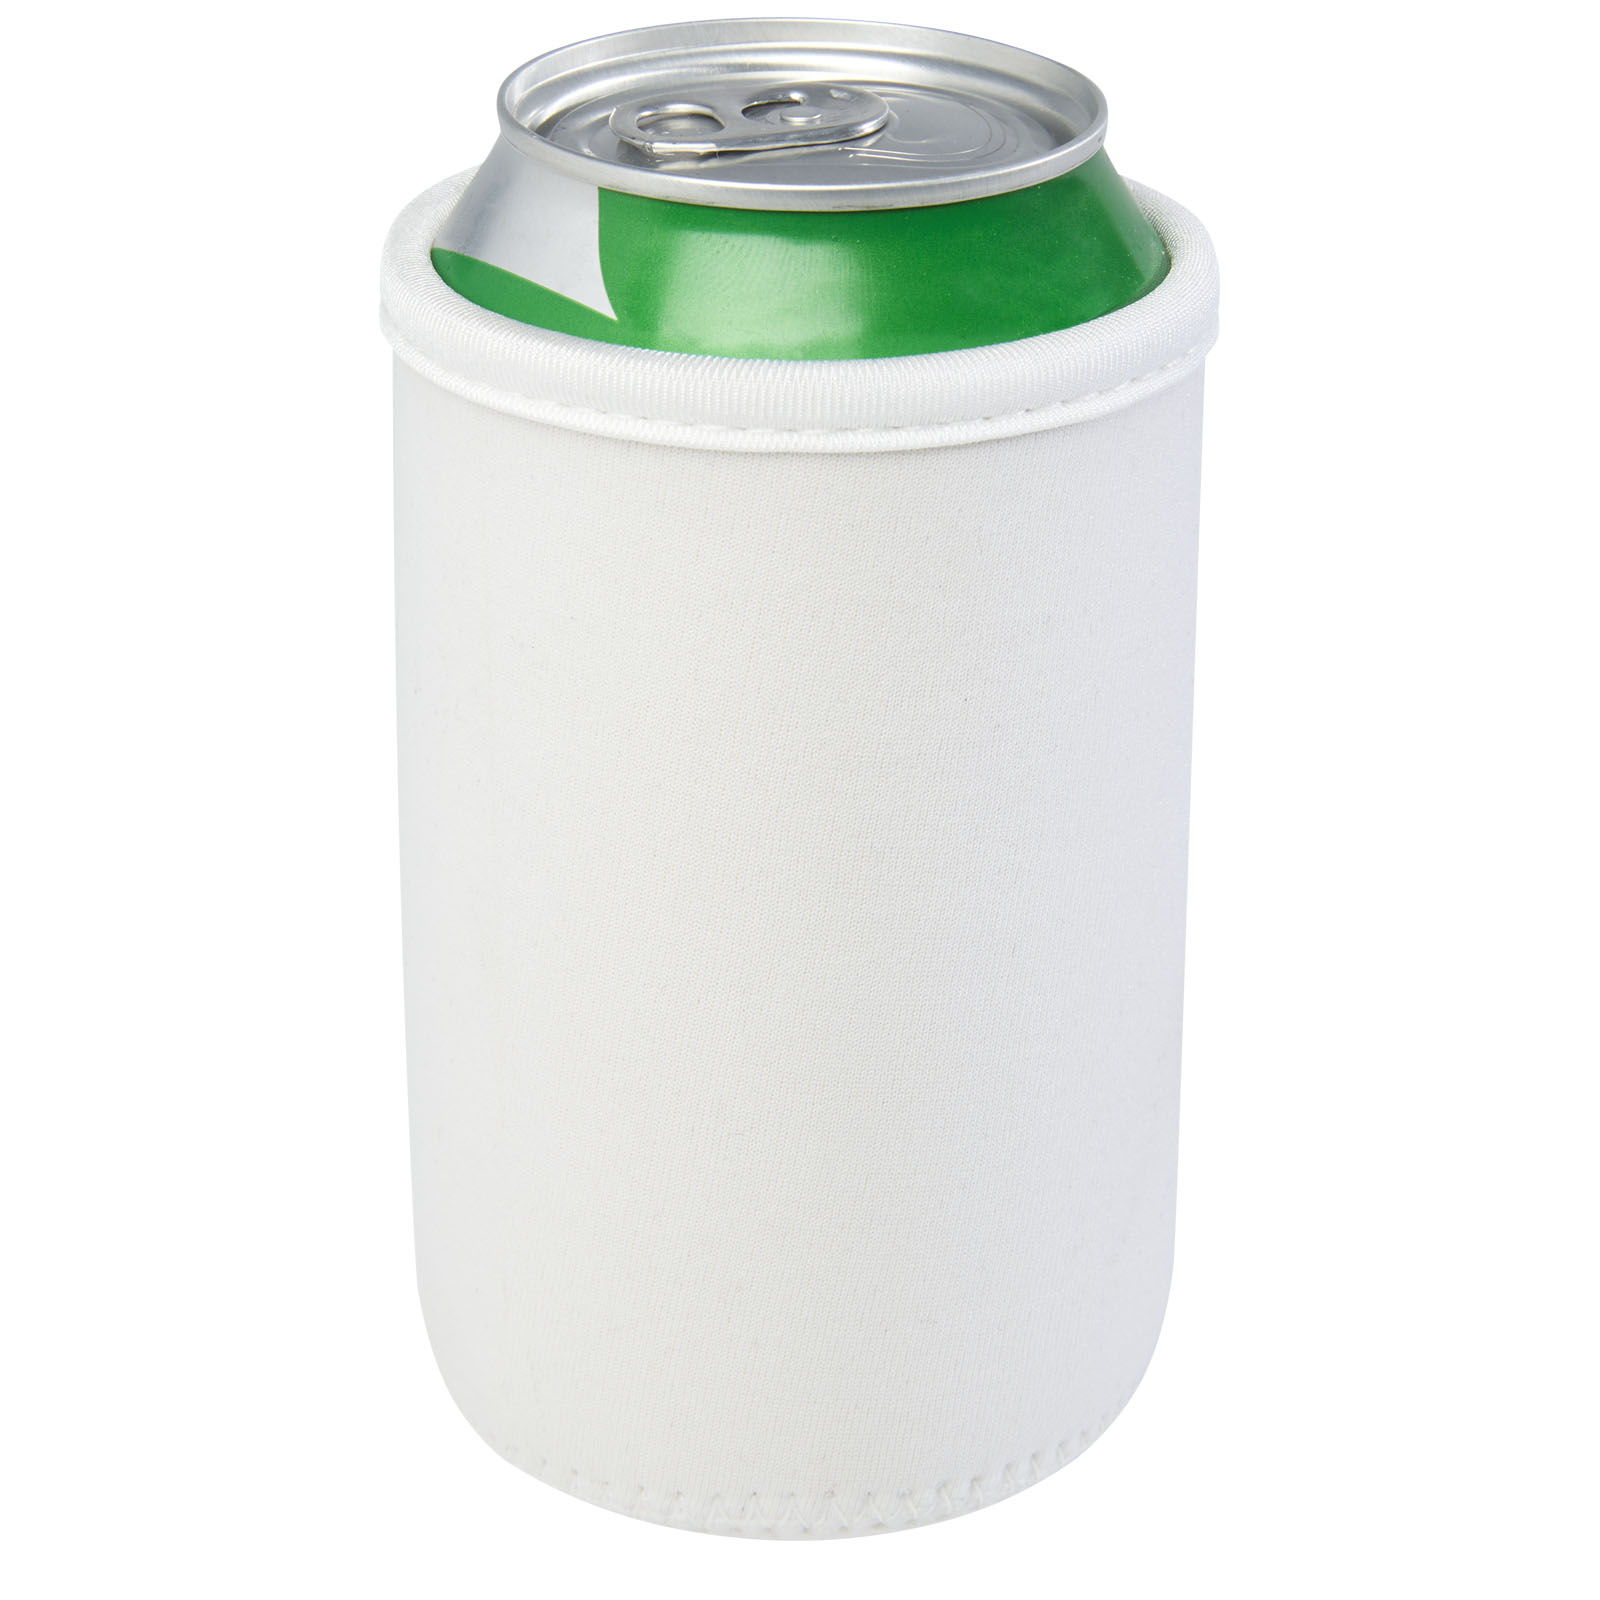 Advertising Cooler bags - Vrie recycled neoprene can sleeve holder